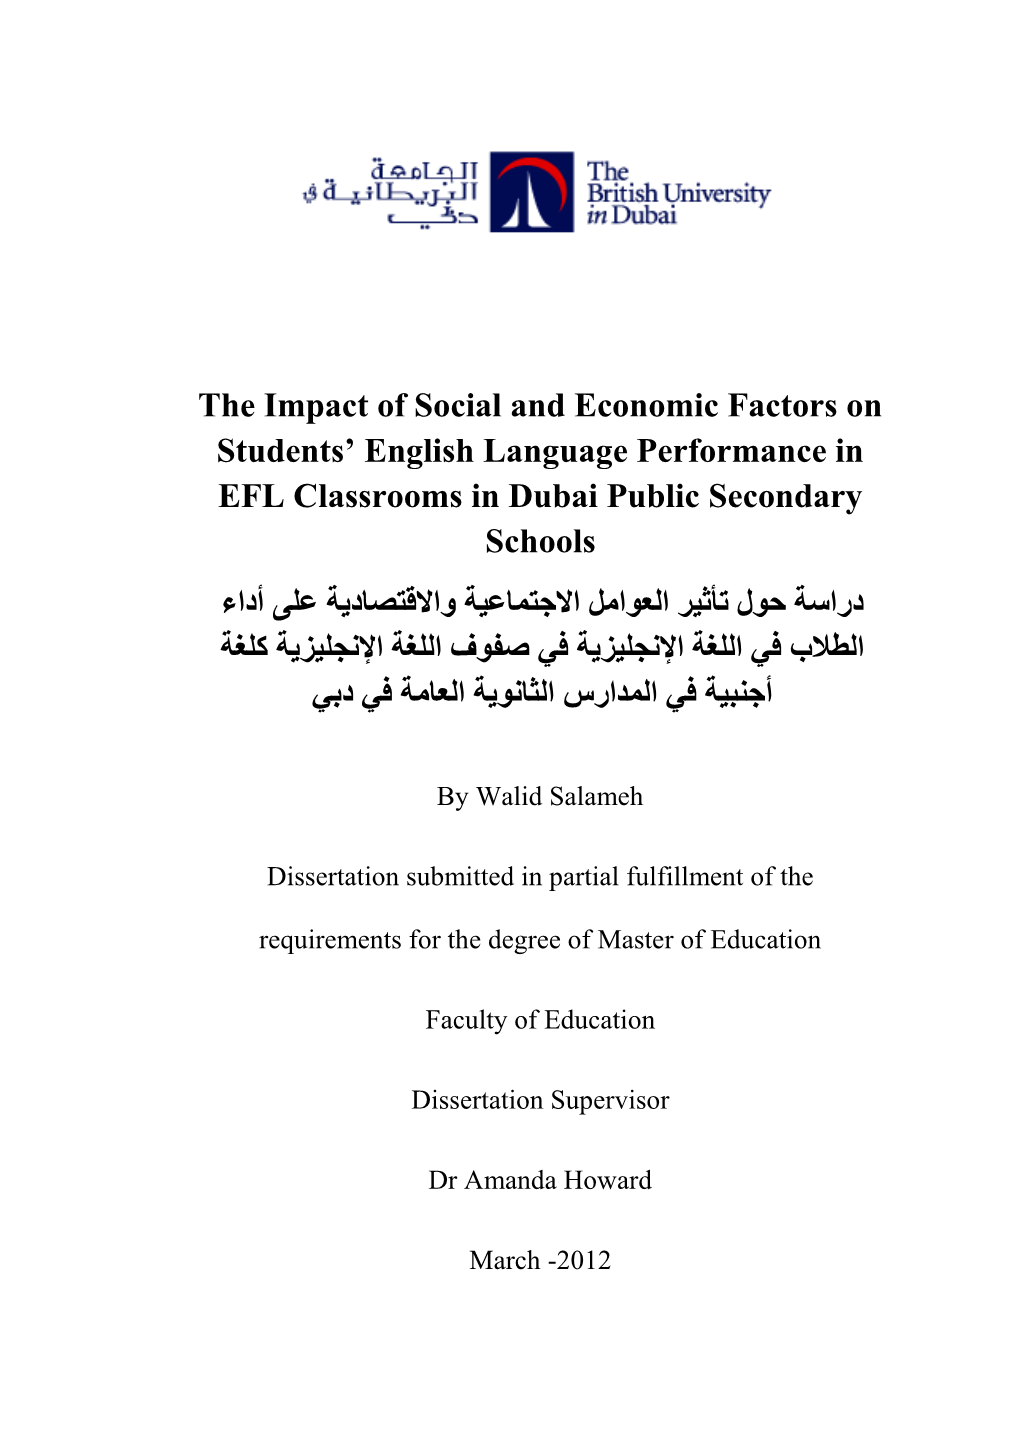 The Impact of Social and Economic Factors on Students' English Language Performance in EFL Classrooms in Dubai Public Secondar